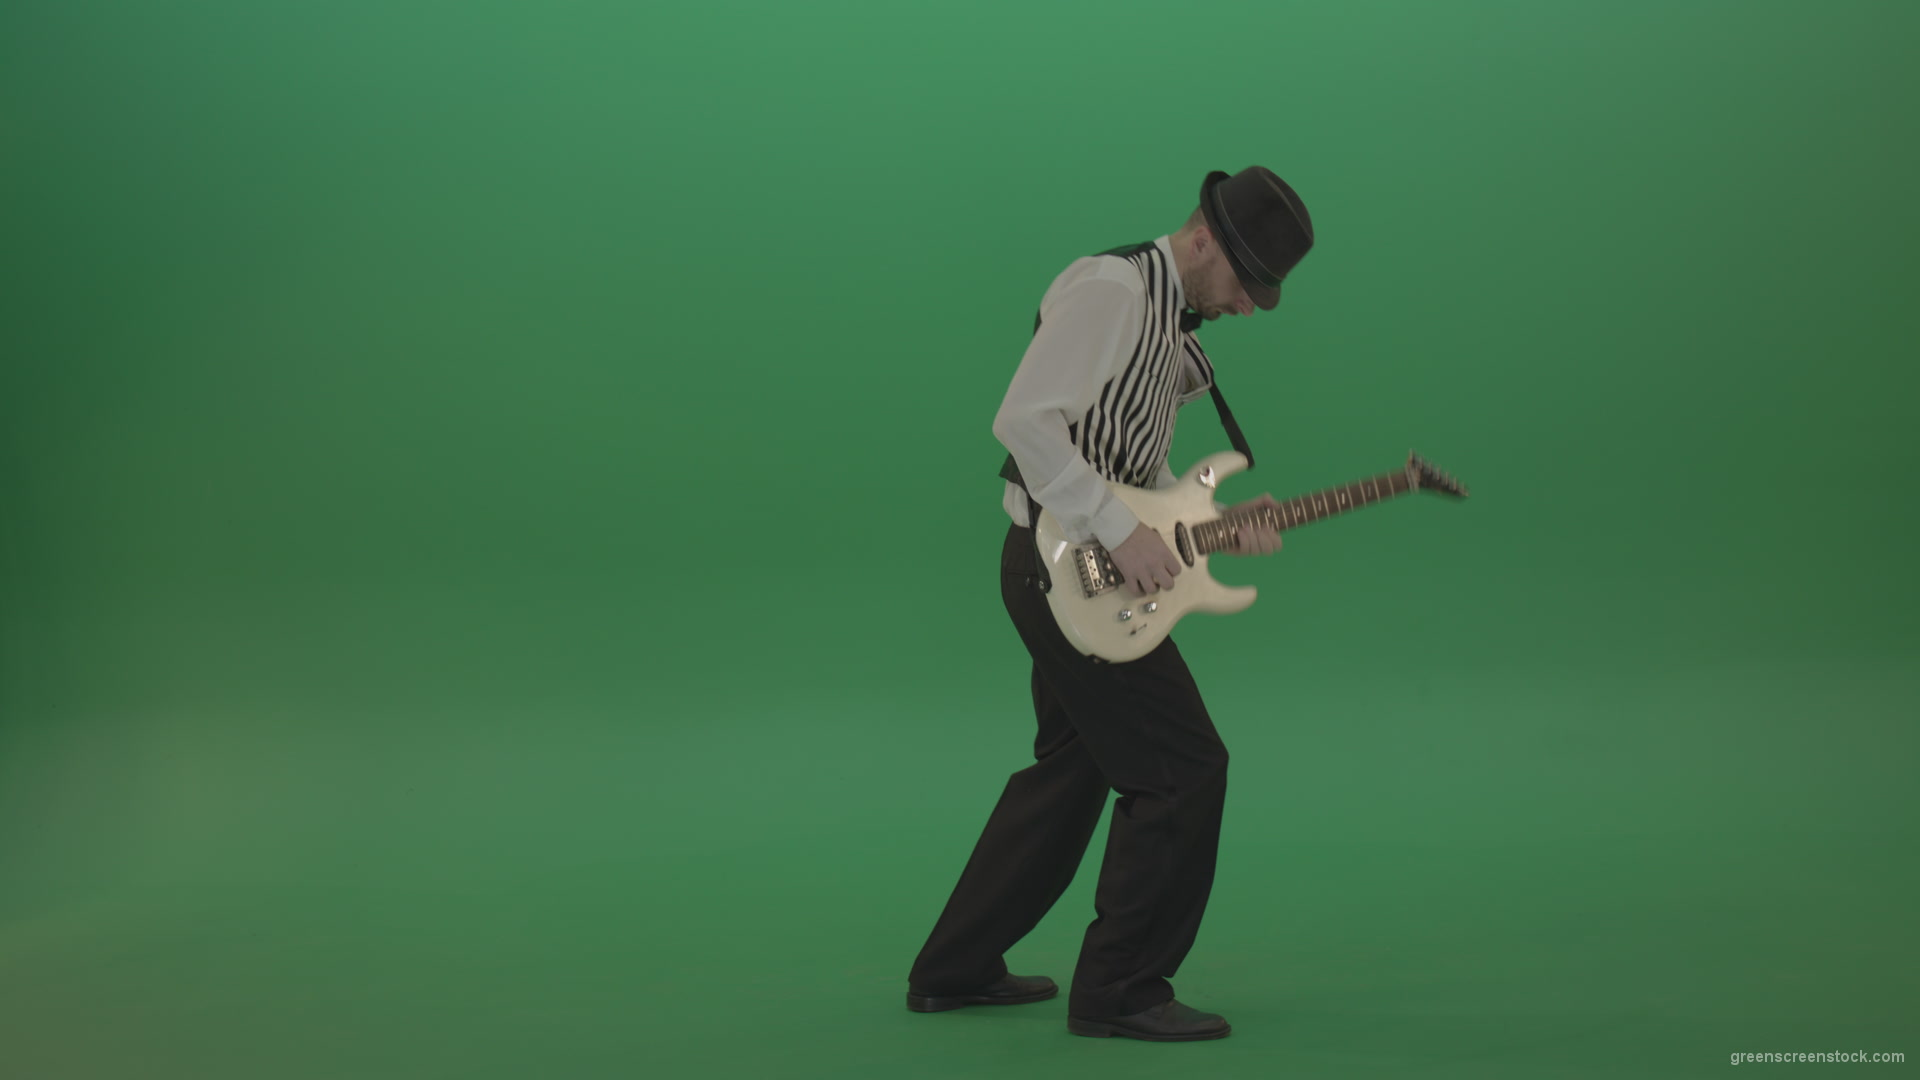 Jazz-man-musician-play-guitar-solo-music-in-guitar-on-green-screen-isolated-in-side-view_005 Green Screen Stock